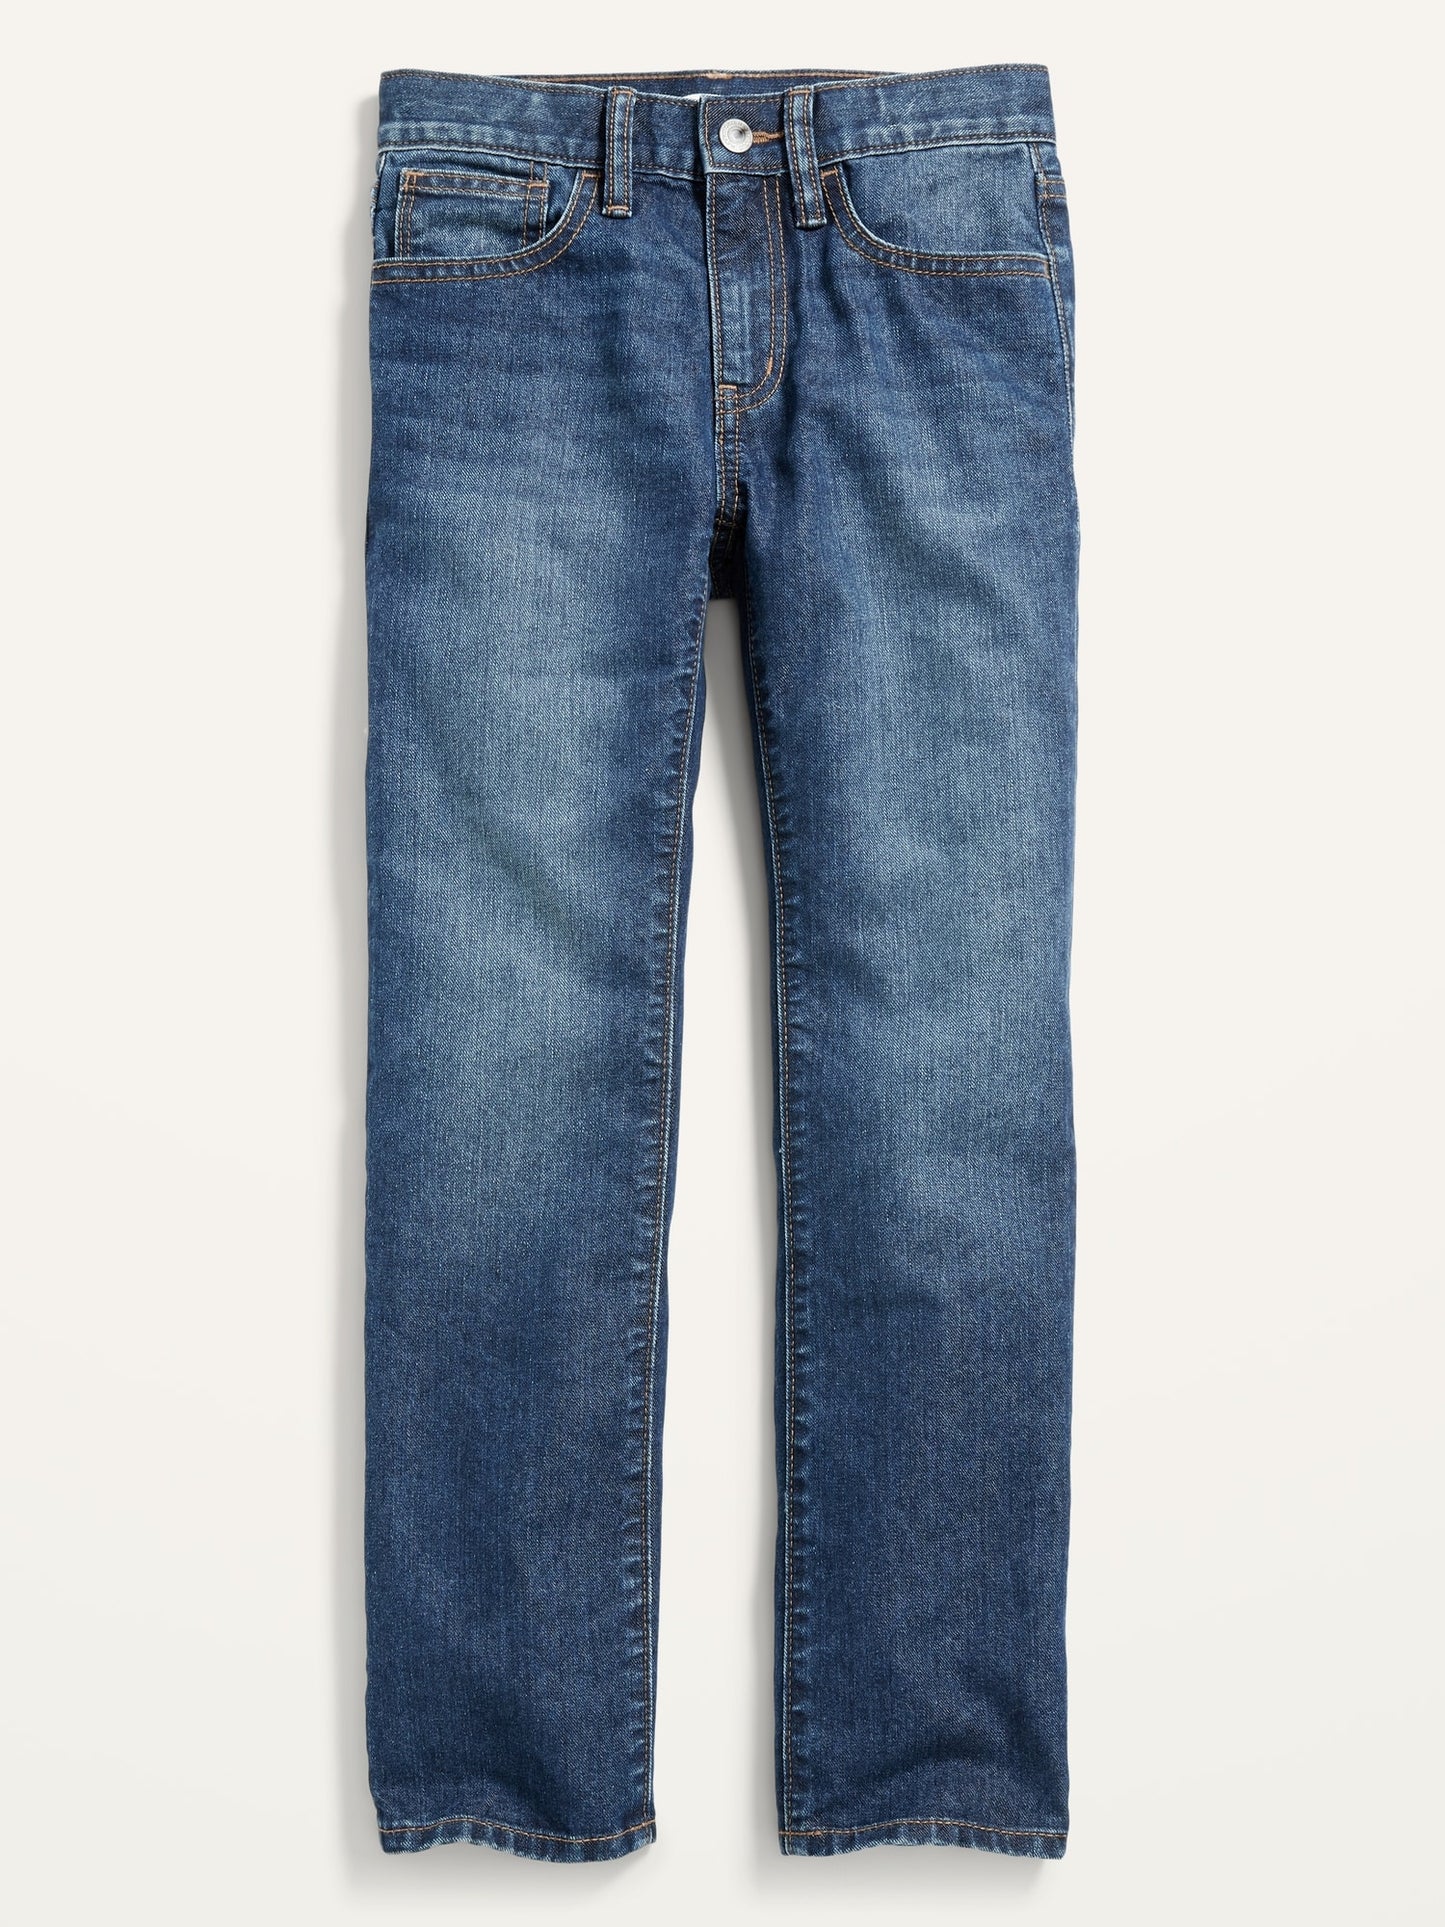 Wow Straight Non-Stretch Jeans for Boys Opp Straight Rinse